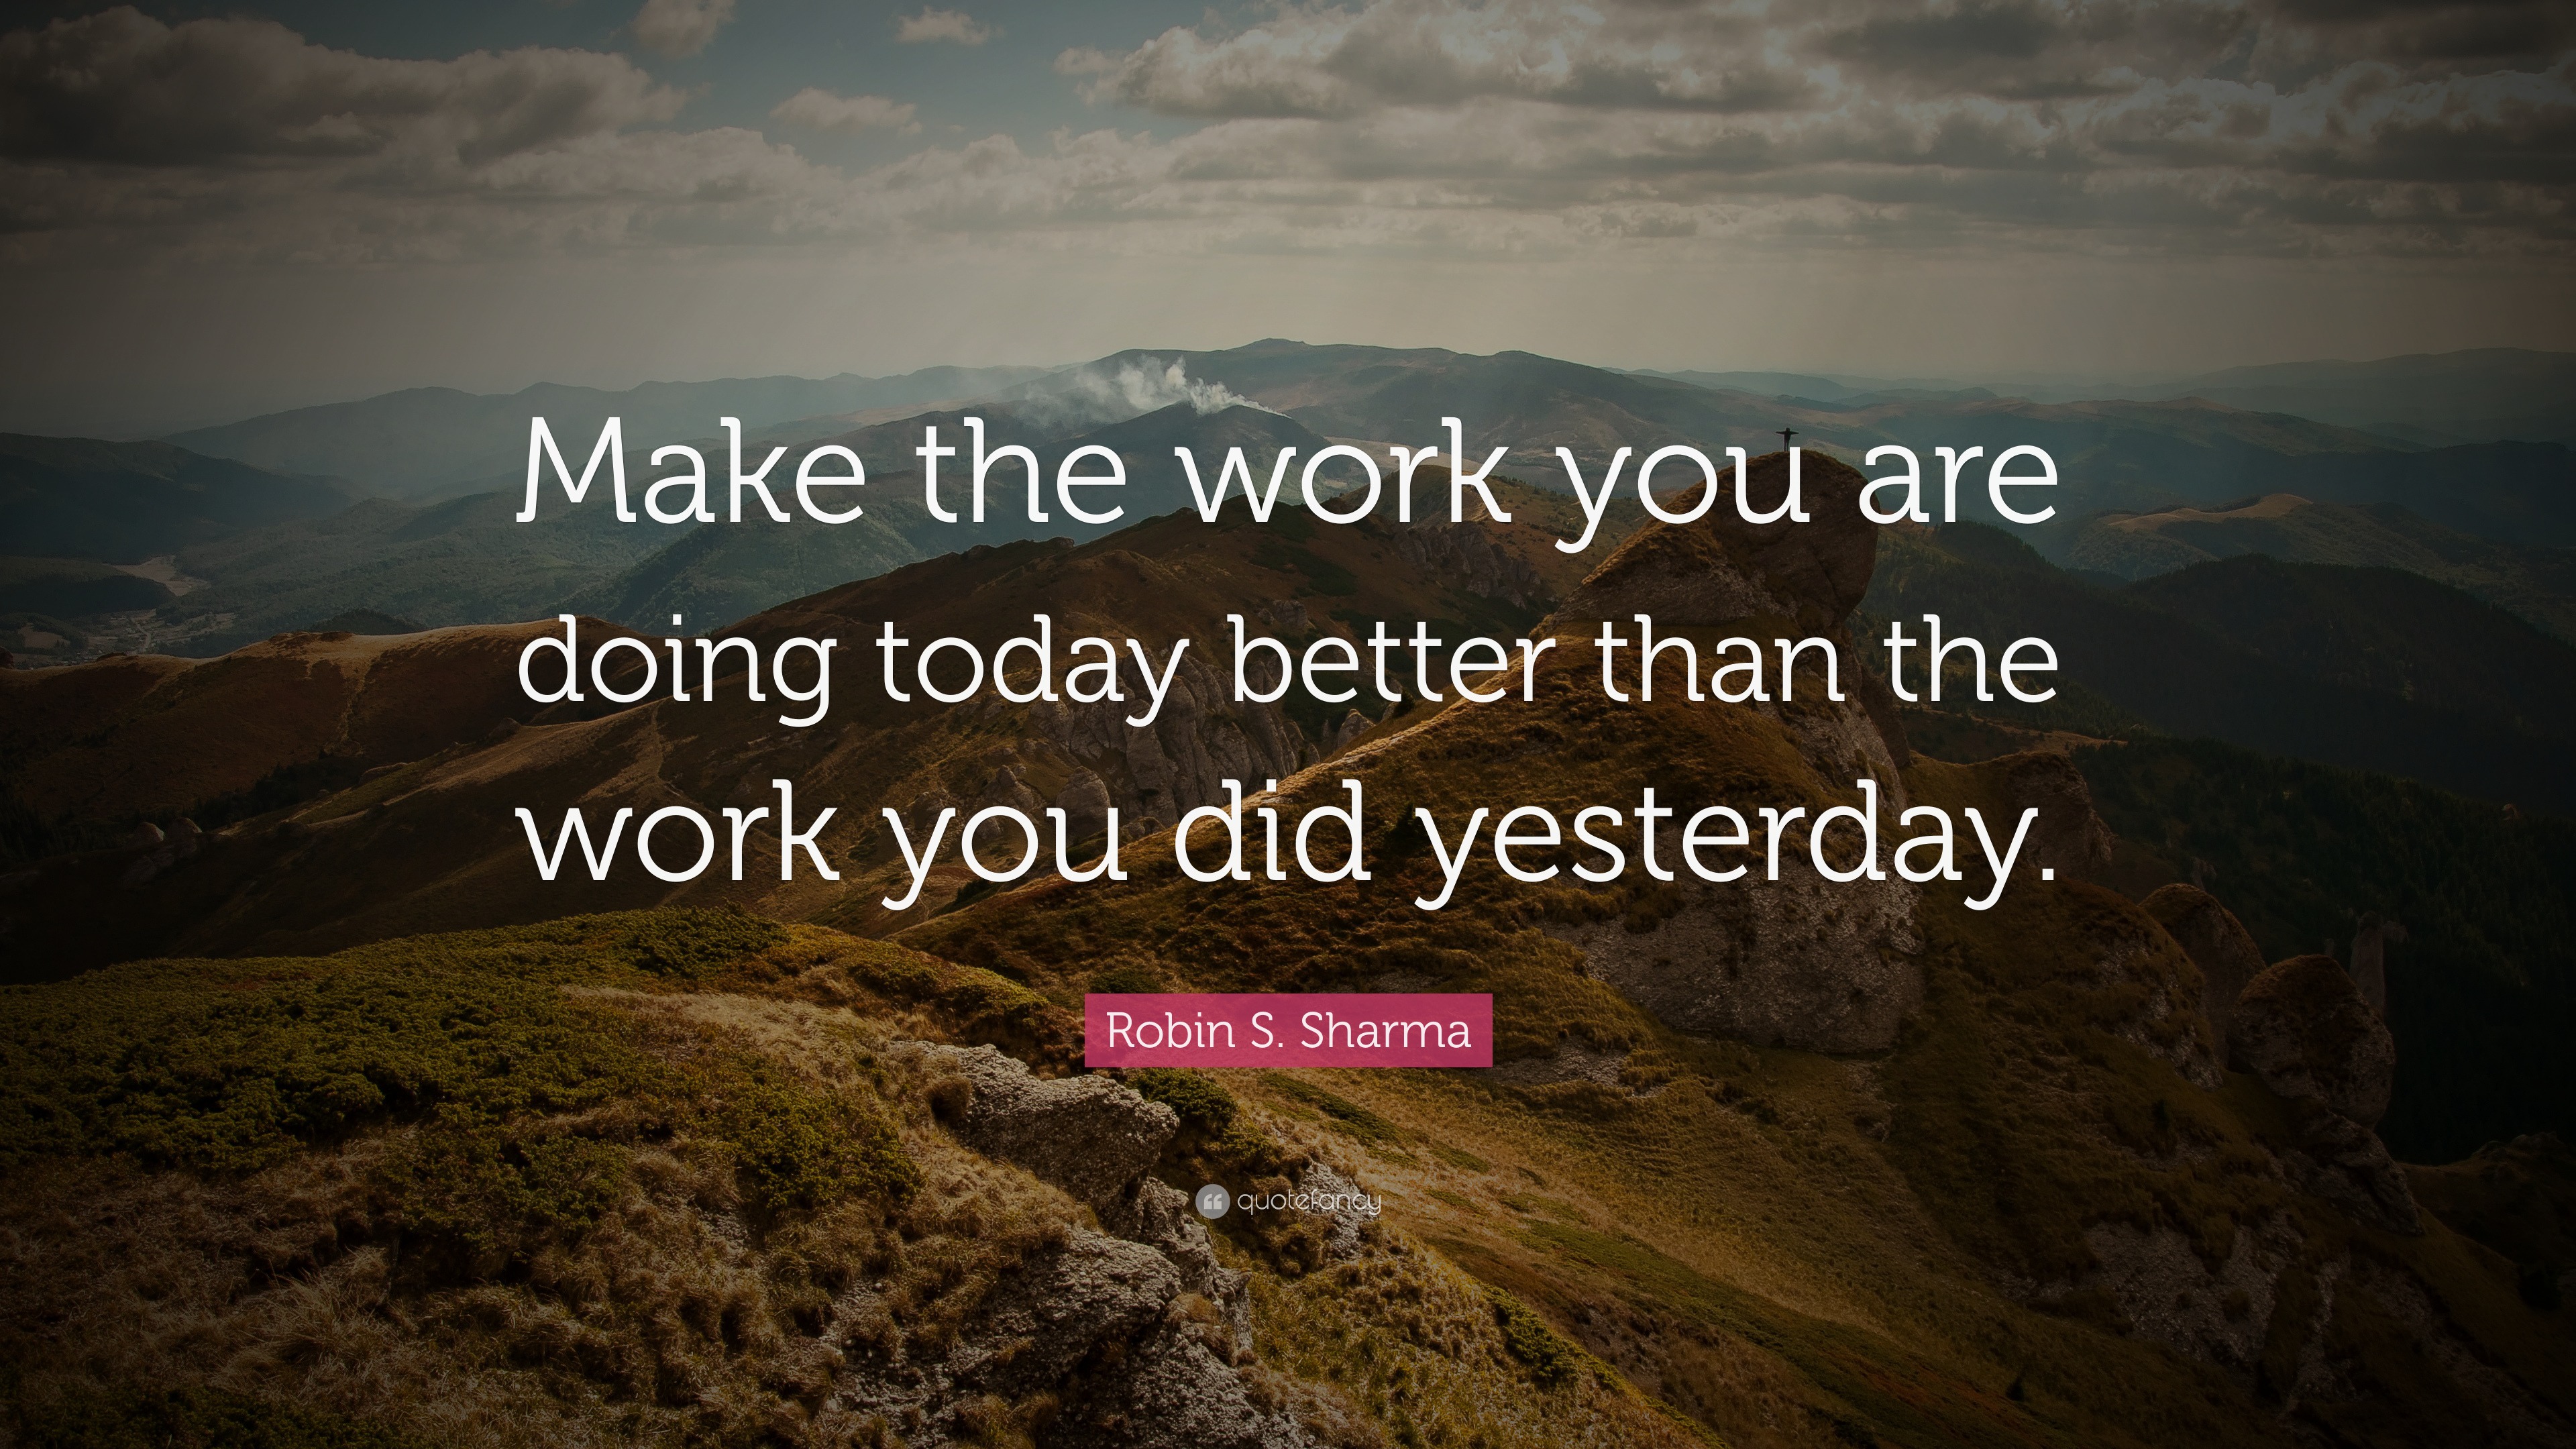 Robin S. Sharma Quote: “Make the work you are doing today better than